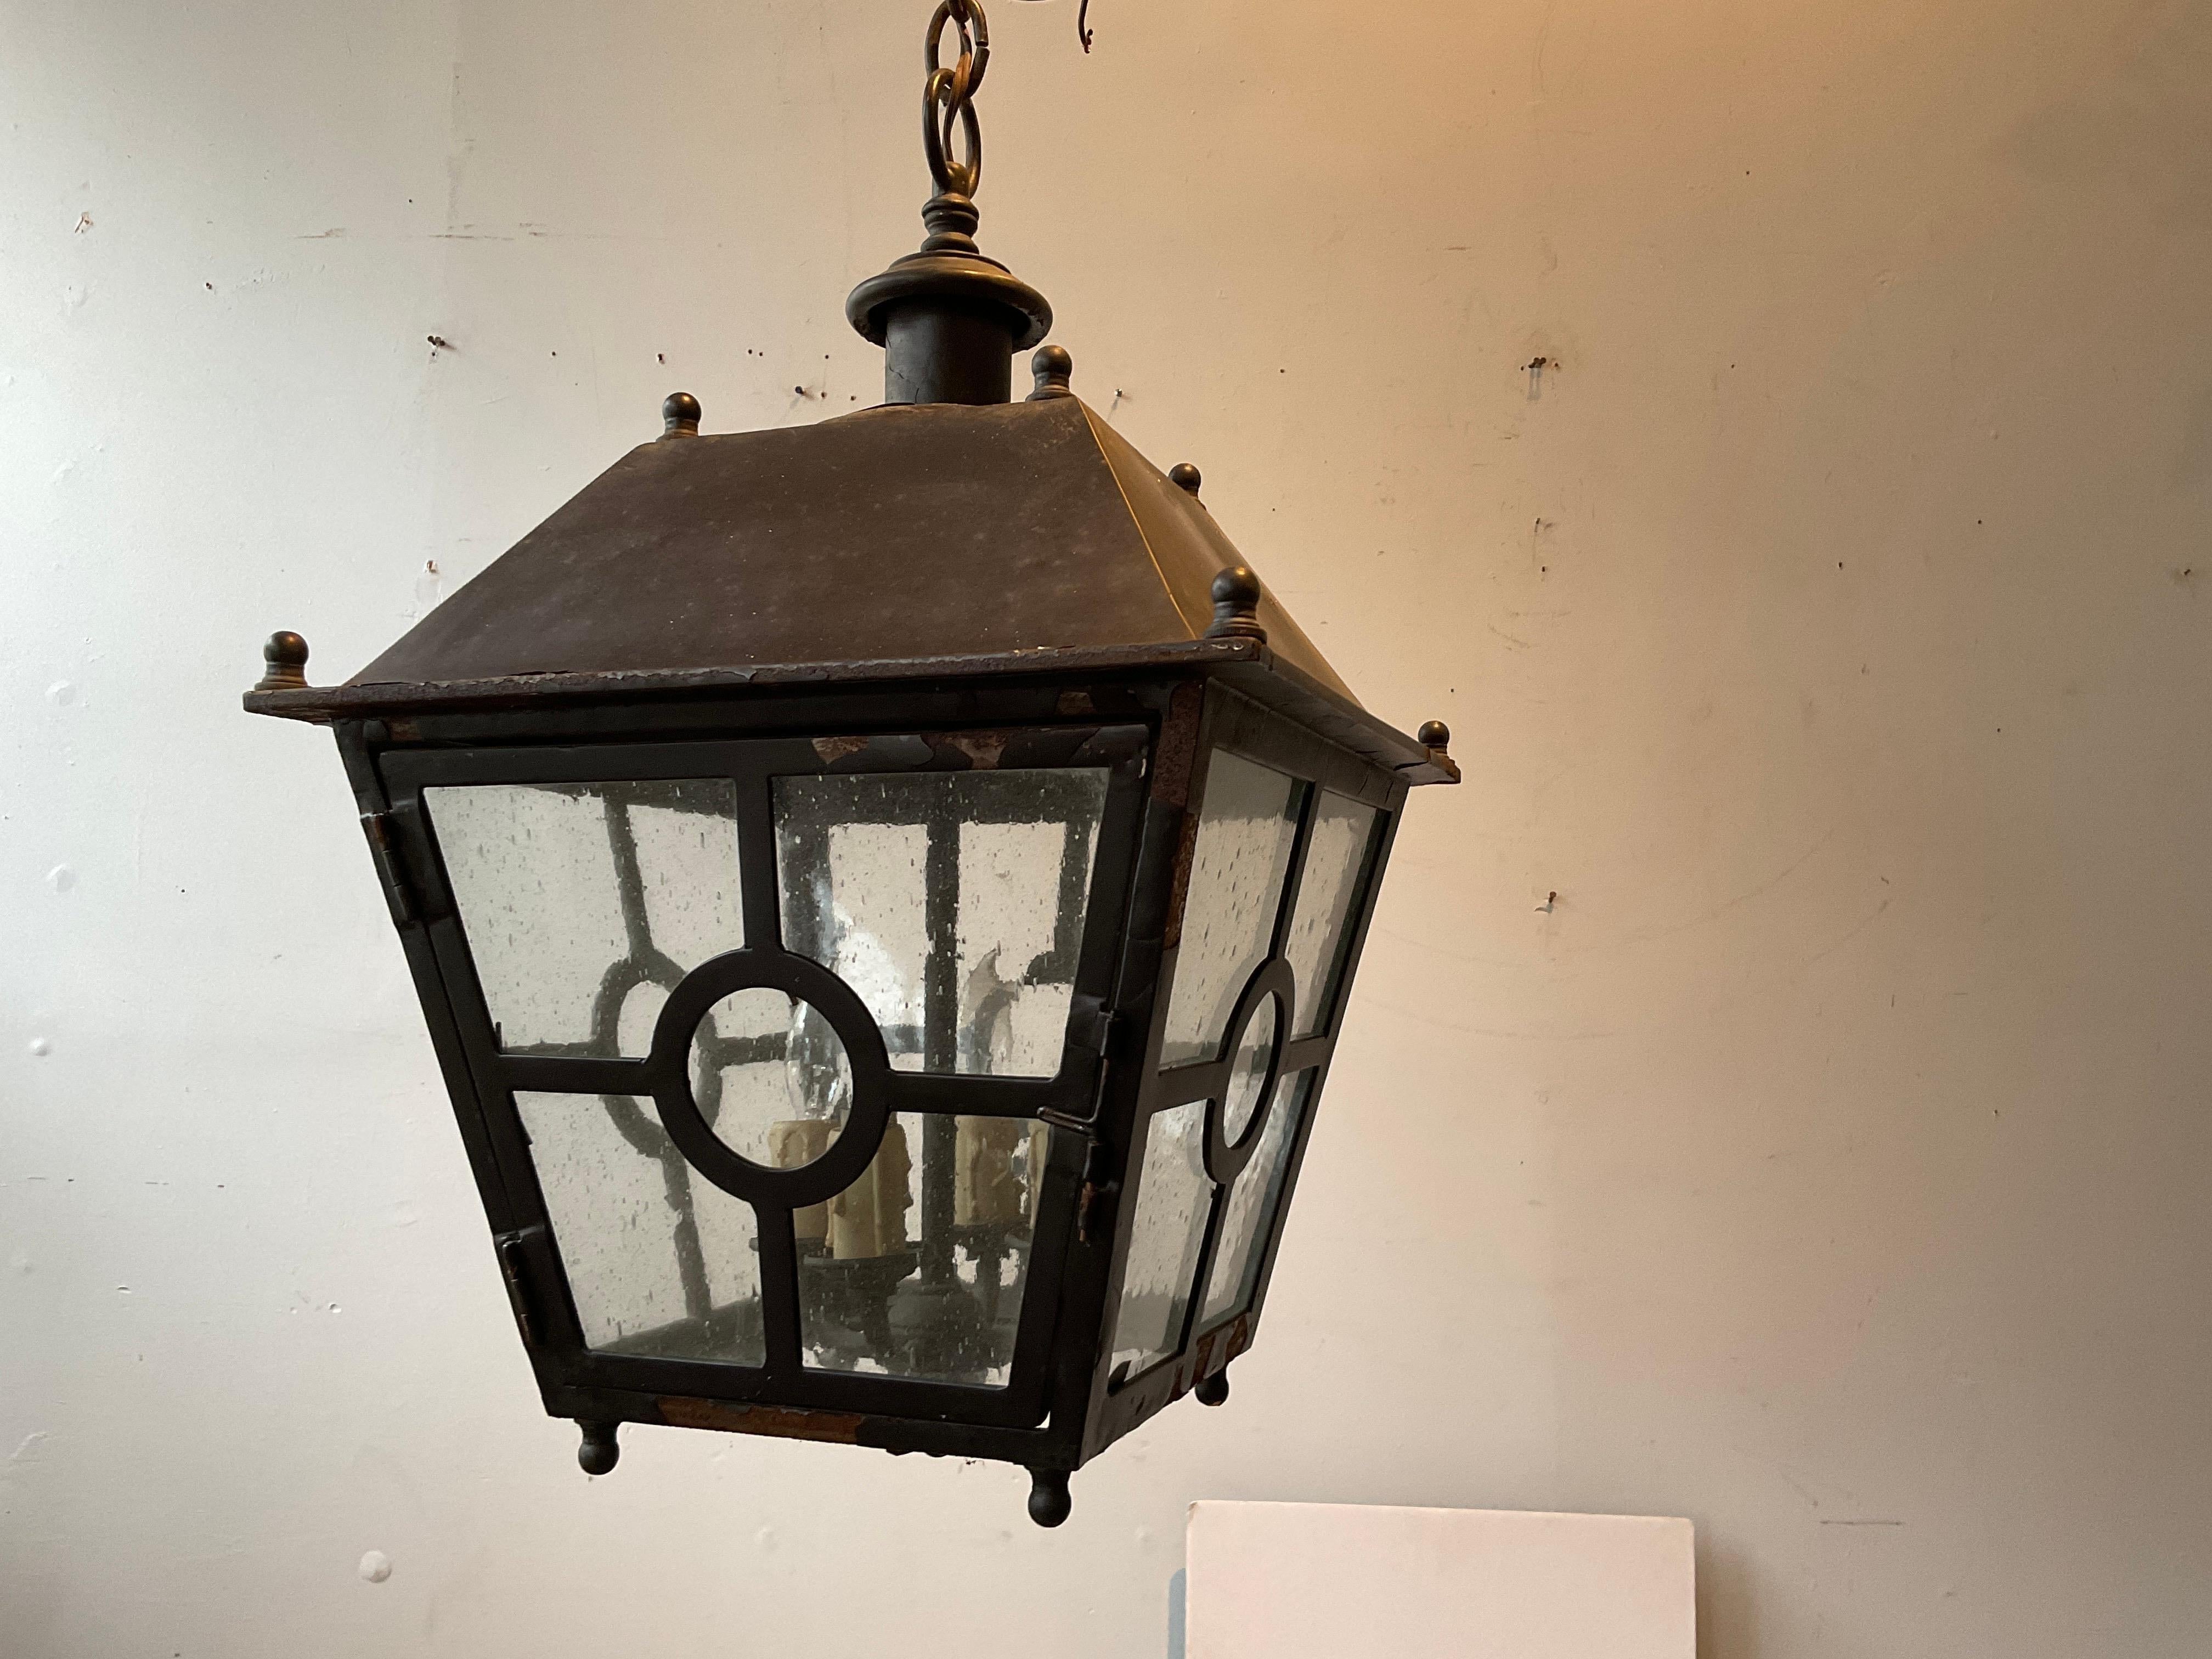 3 Steel classical lanterns with antiqued bubble glass.
Needs rewiring. Finish peeling off in spots.